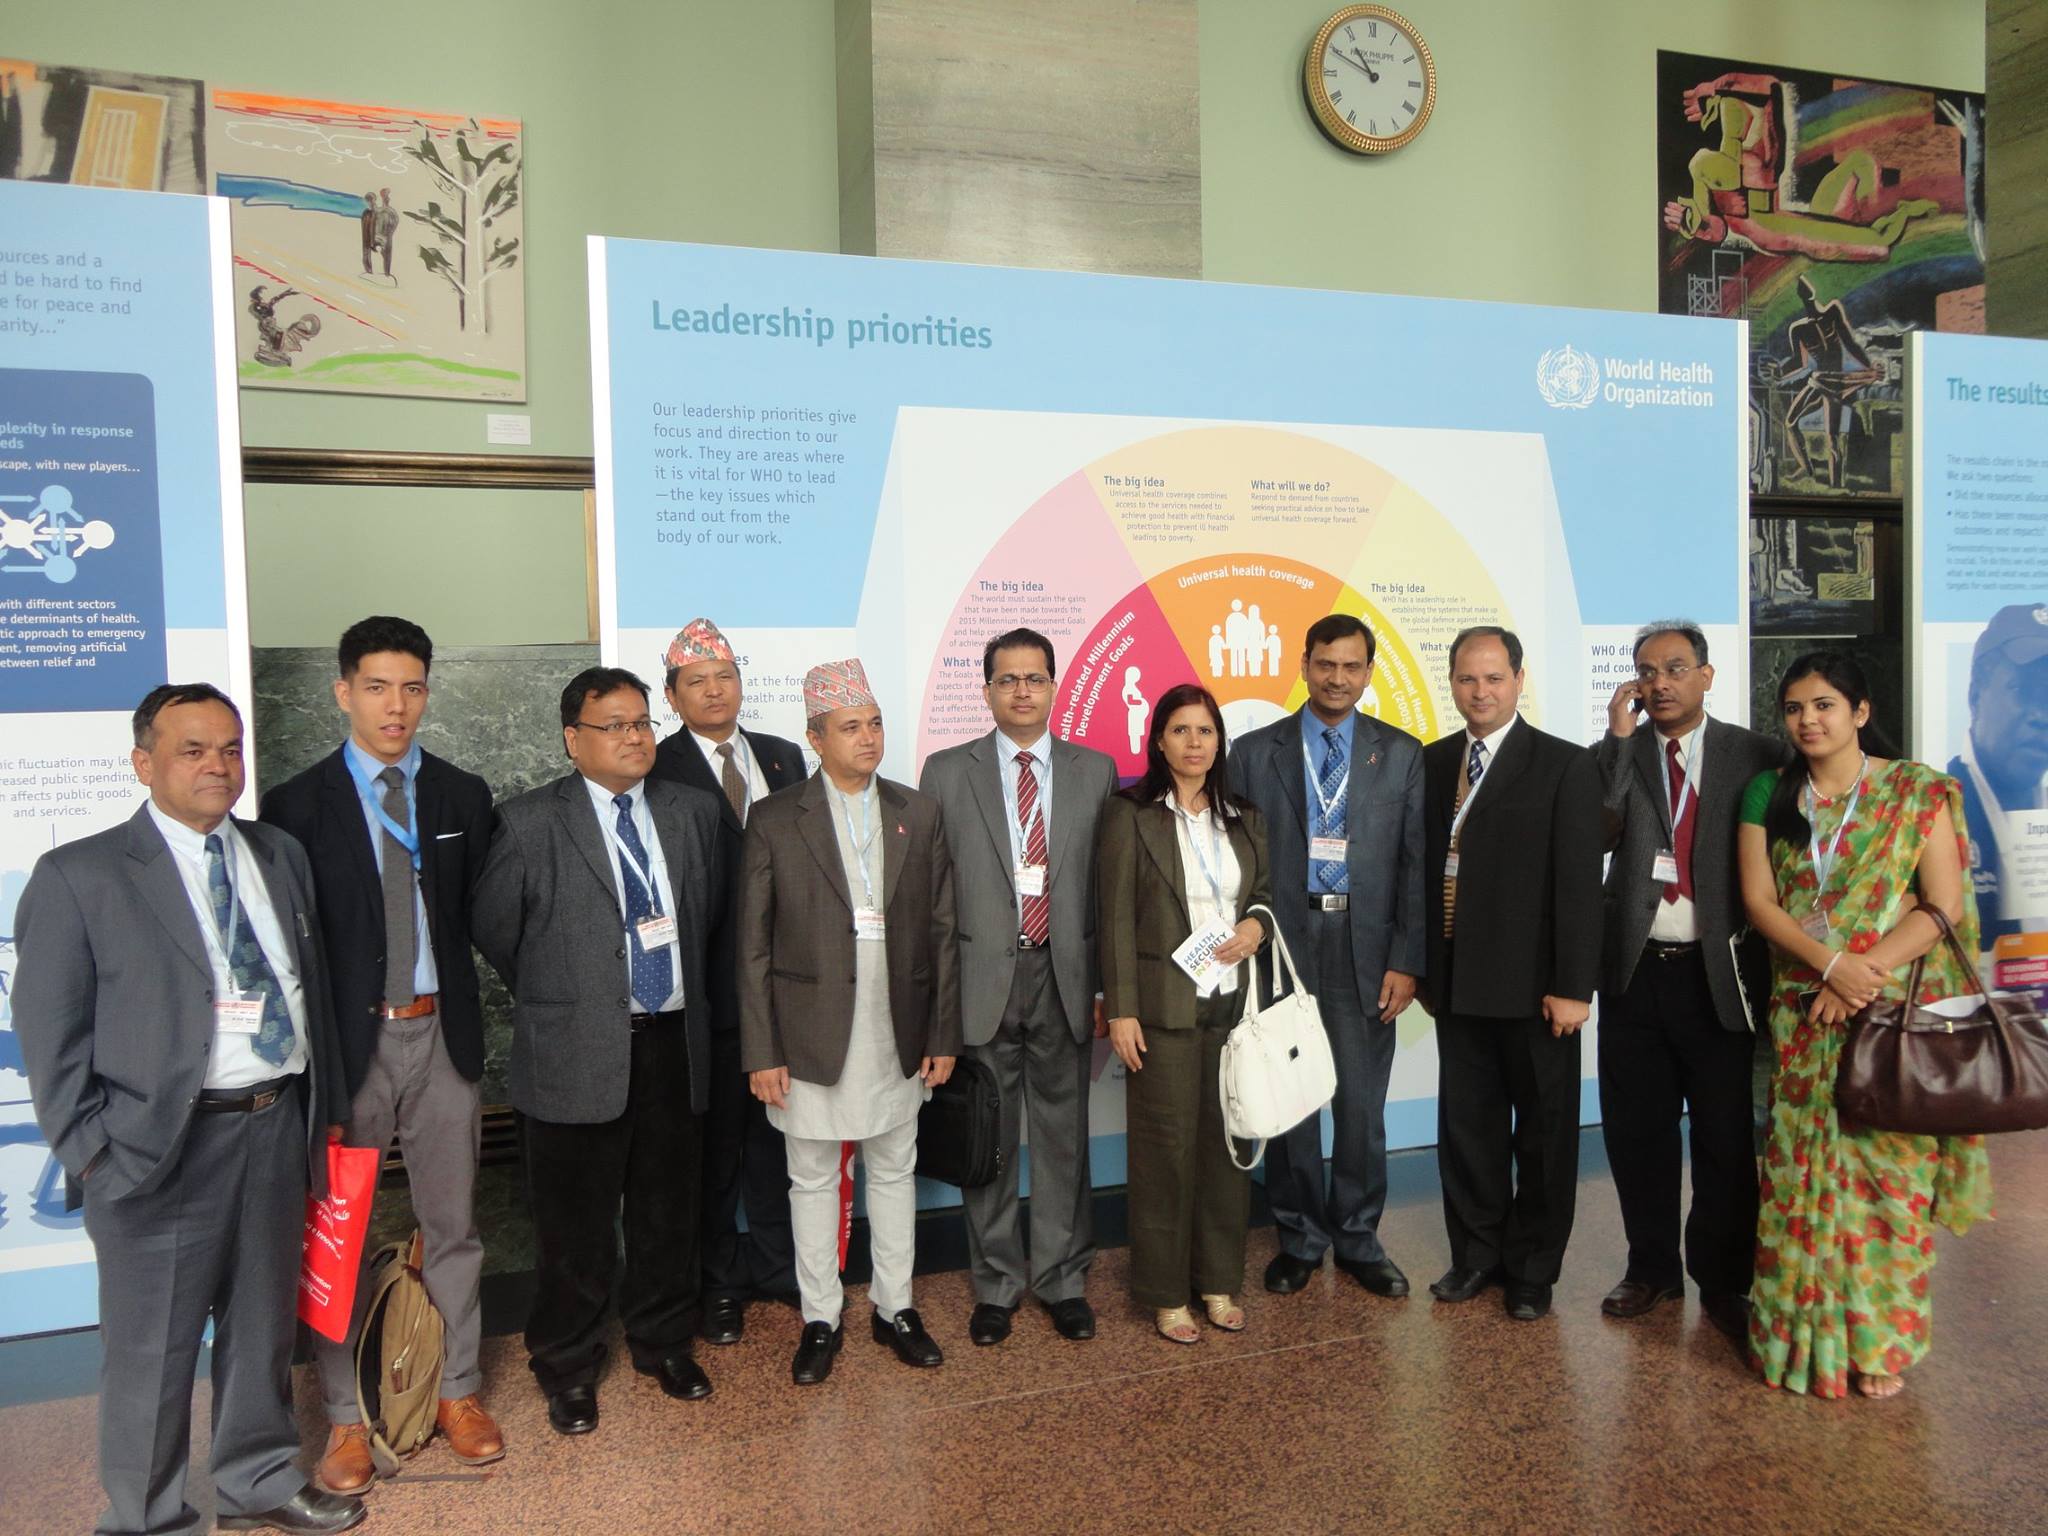 Hon Minister for Health and Population led the Nepal team at the World Health Assembly held in Geneva, Switzerland.